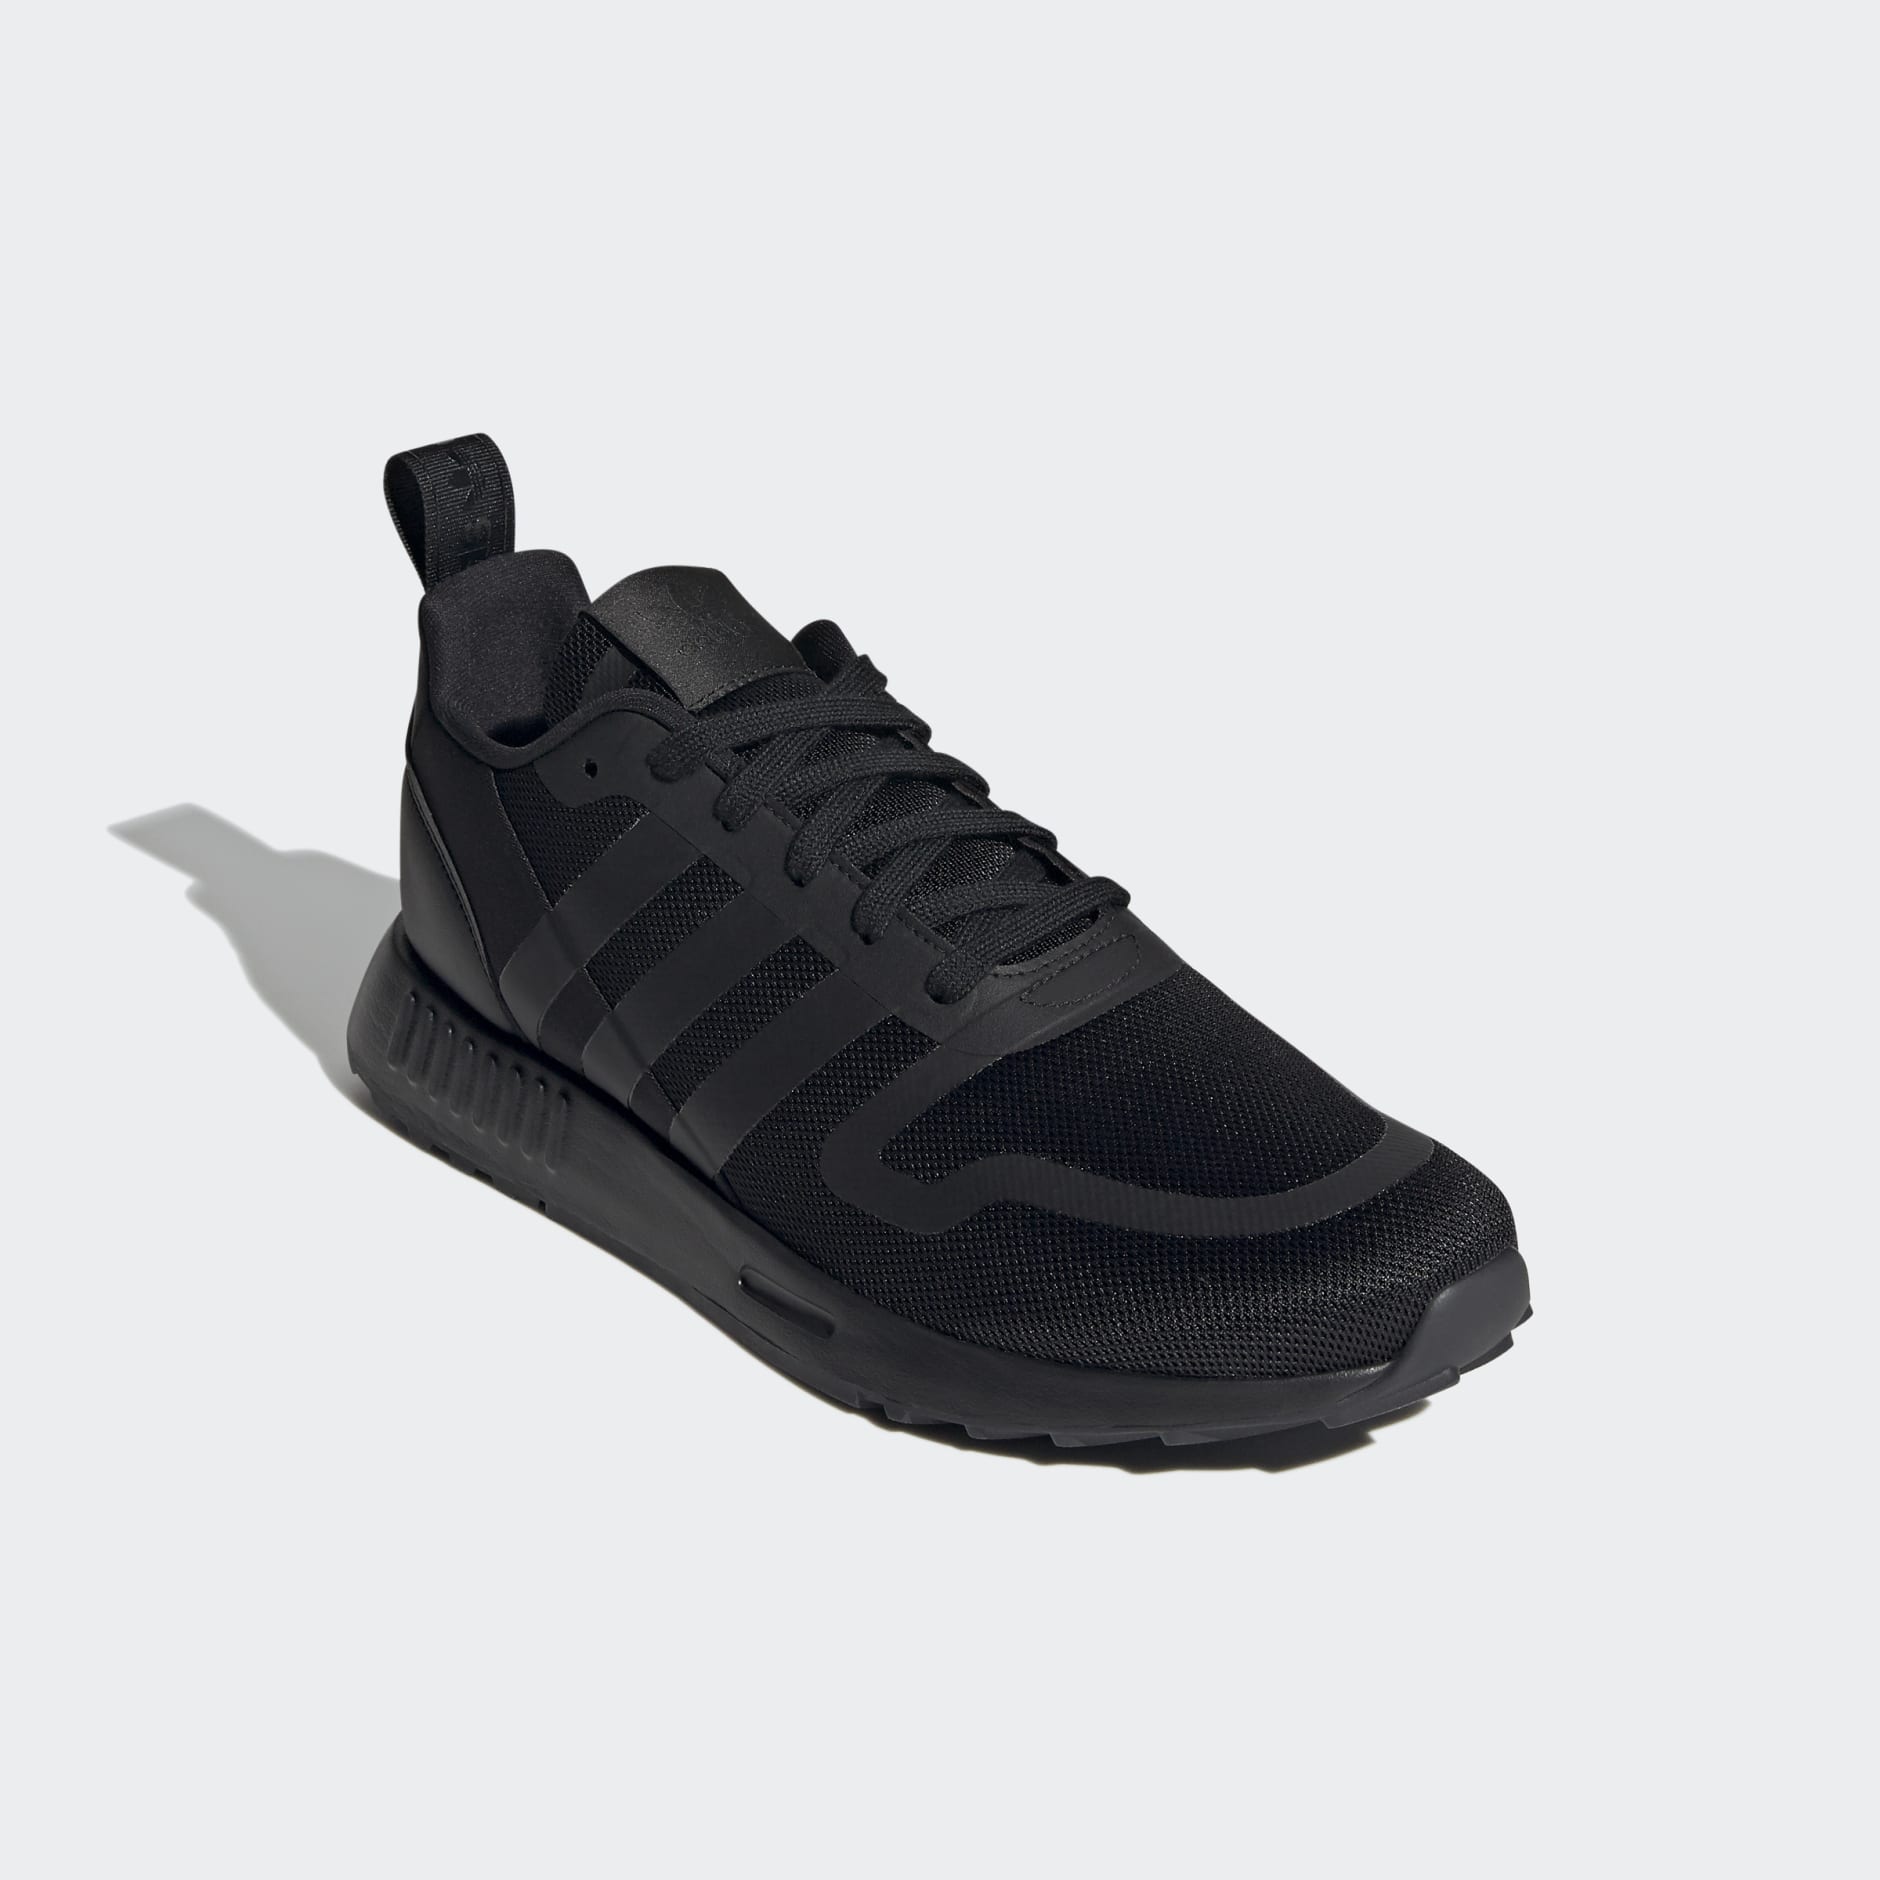 Junior Sovereign abort Shoes - MULTIX SHOES - Black | adidas South Africa